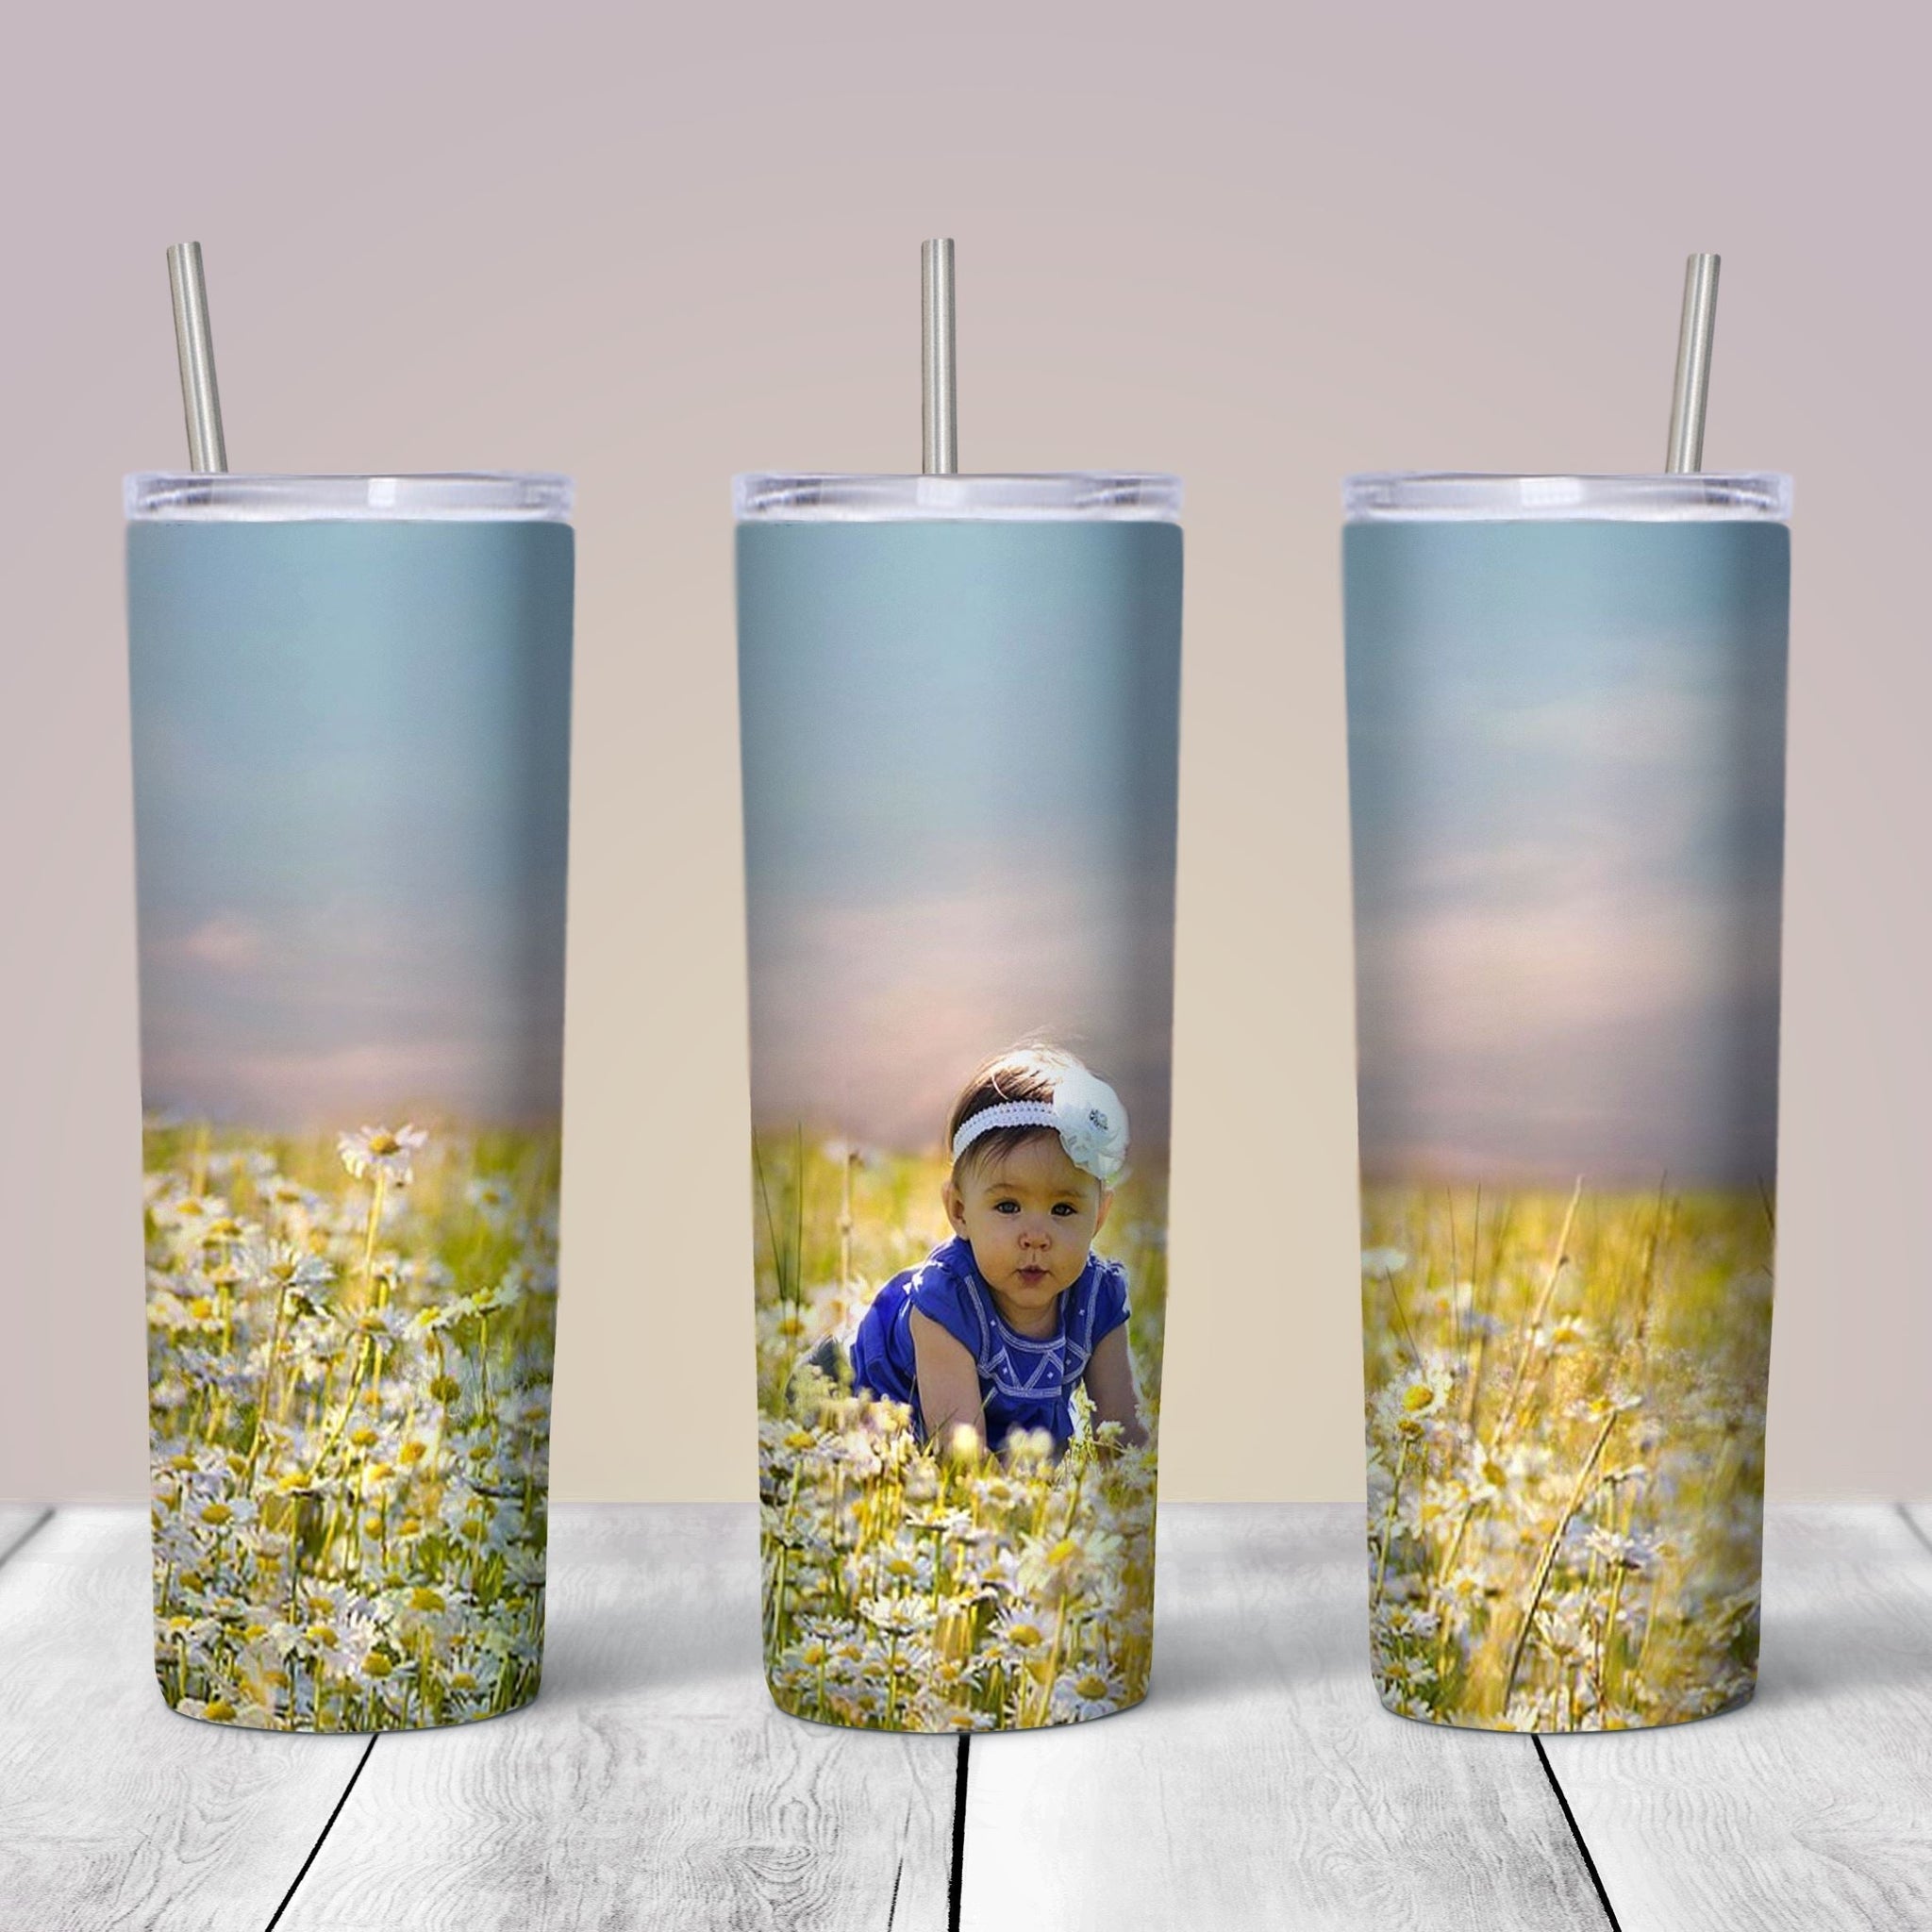 How to Make a Purse Tumbler Using Sublimation 